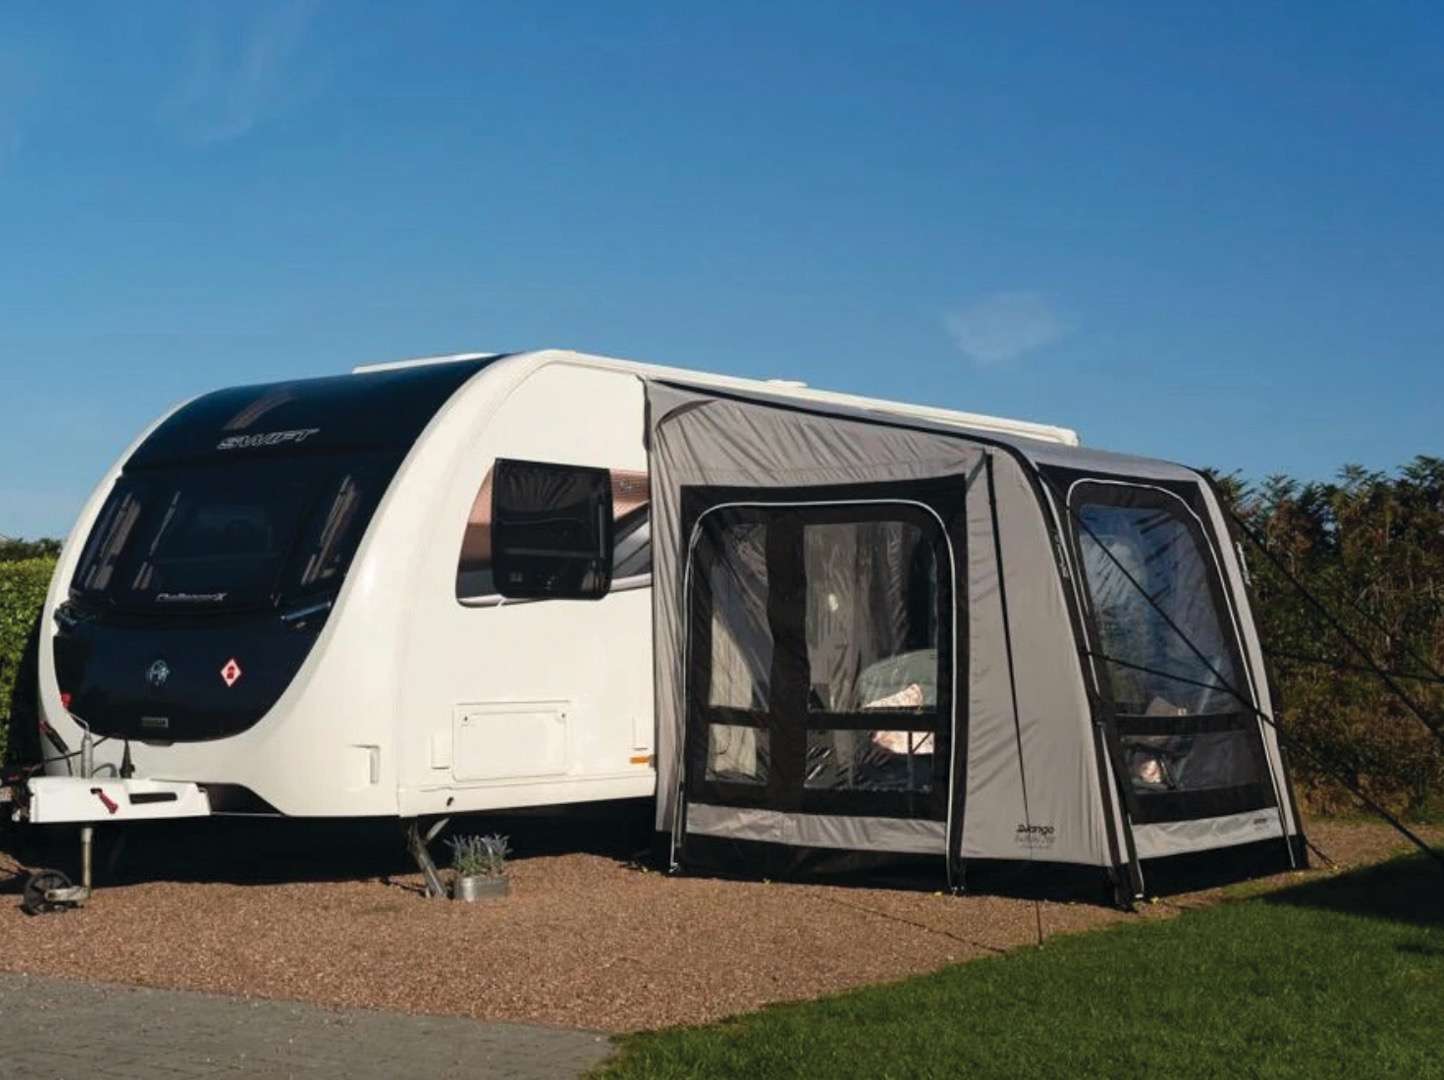 The Vango Balletto Air 200 Elements Shield awning